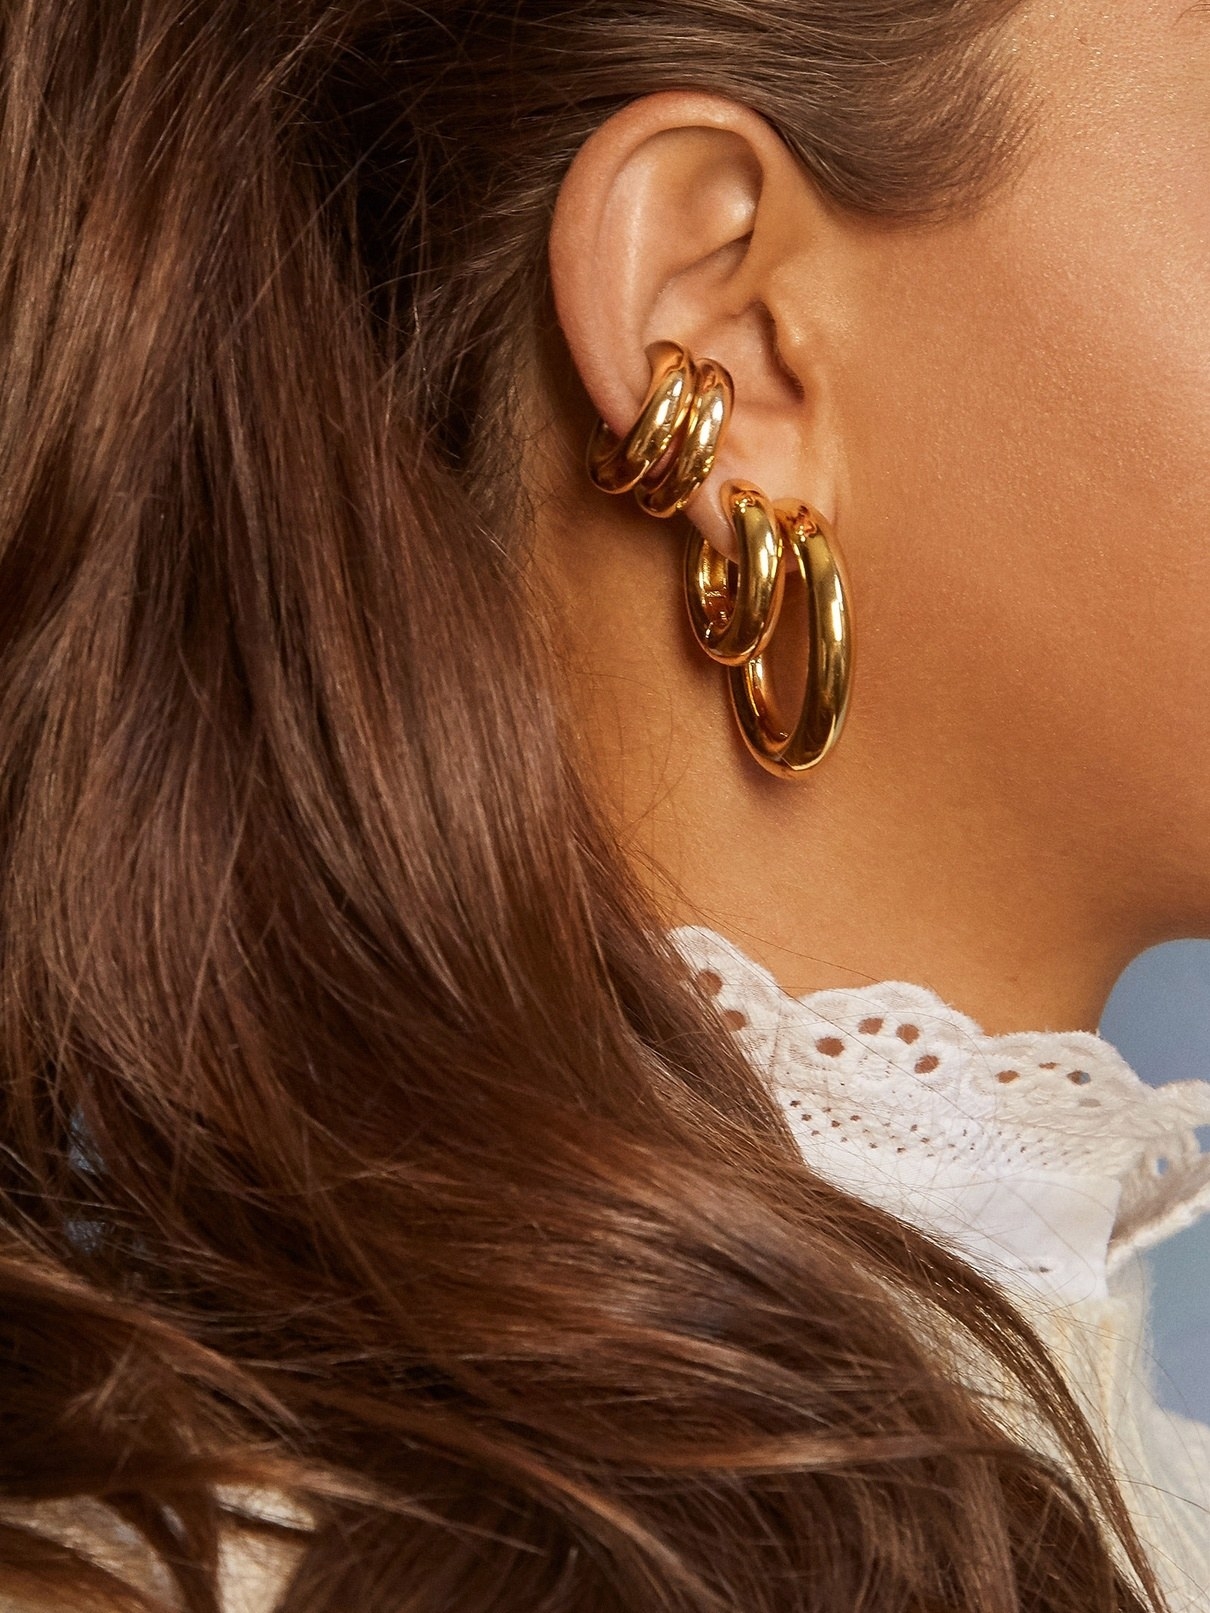 model wearing the three different sized earrings